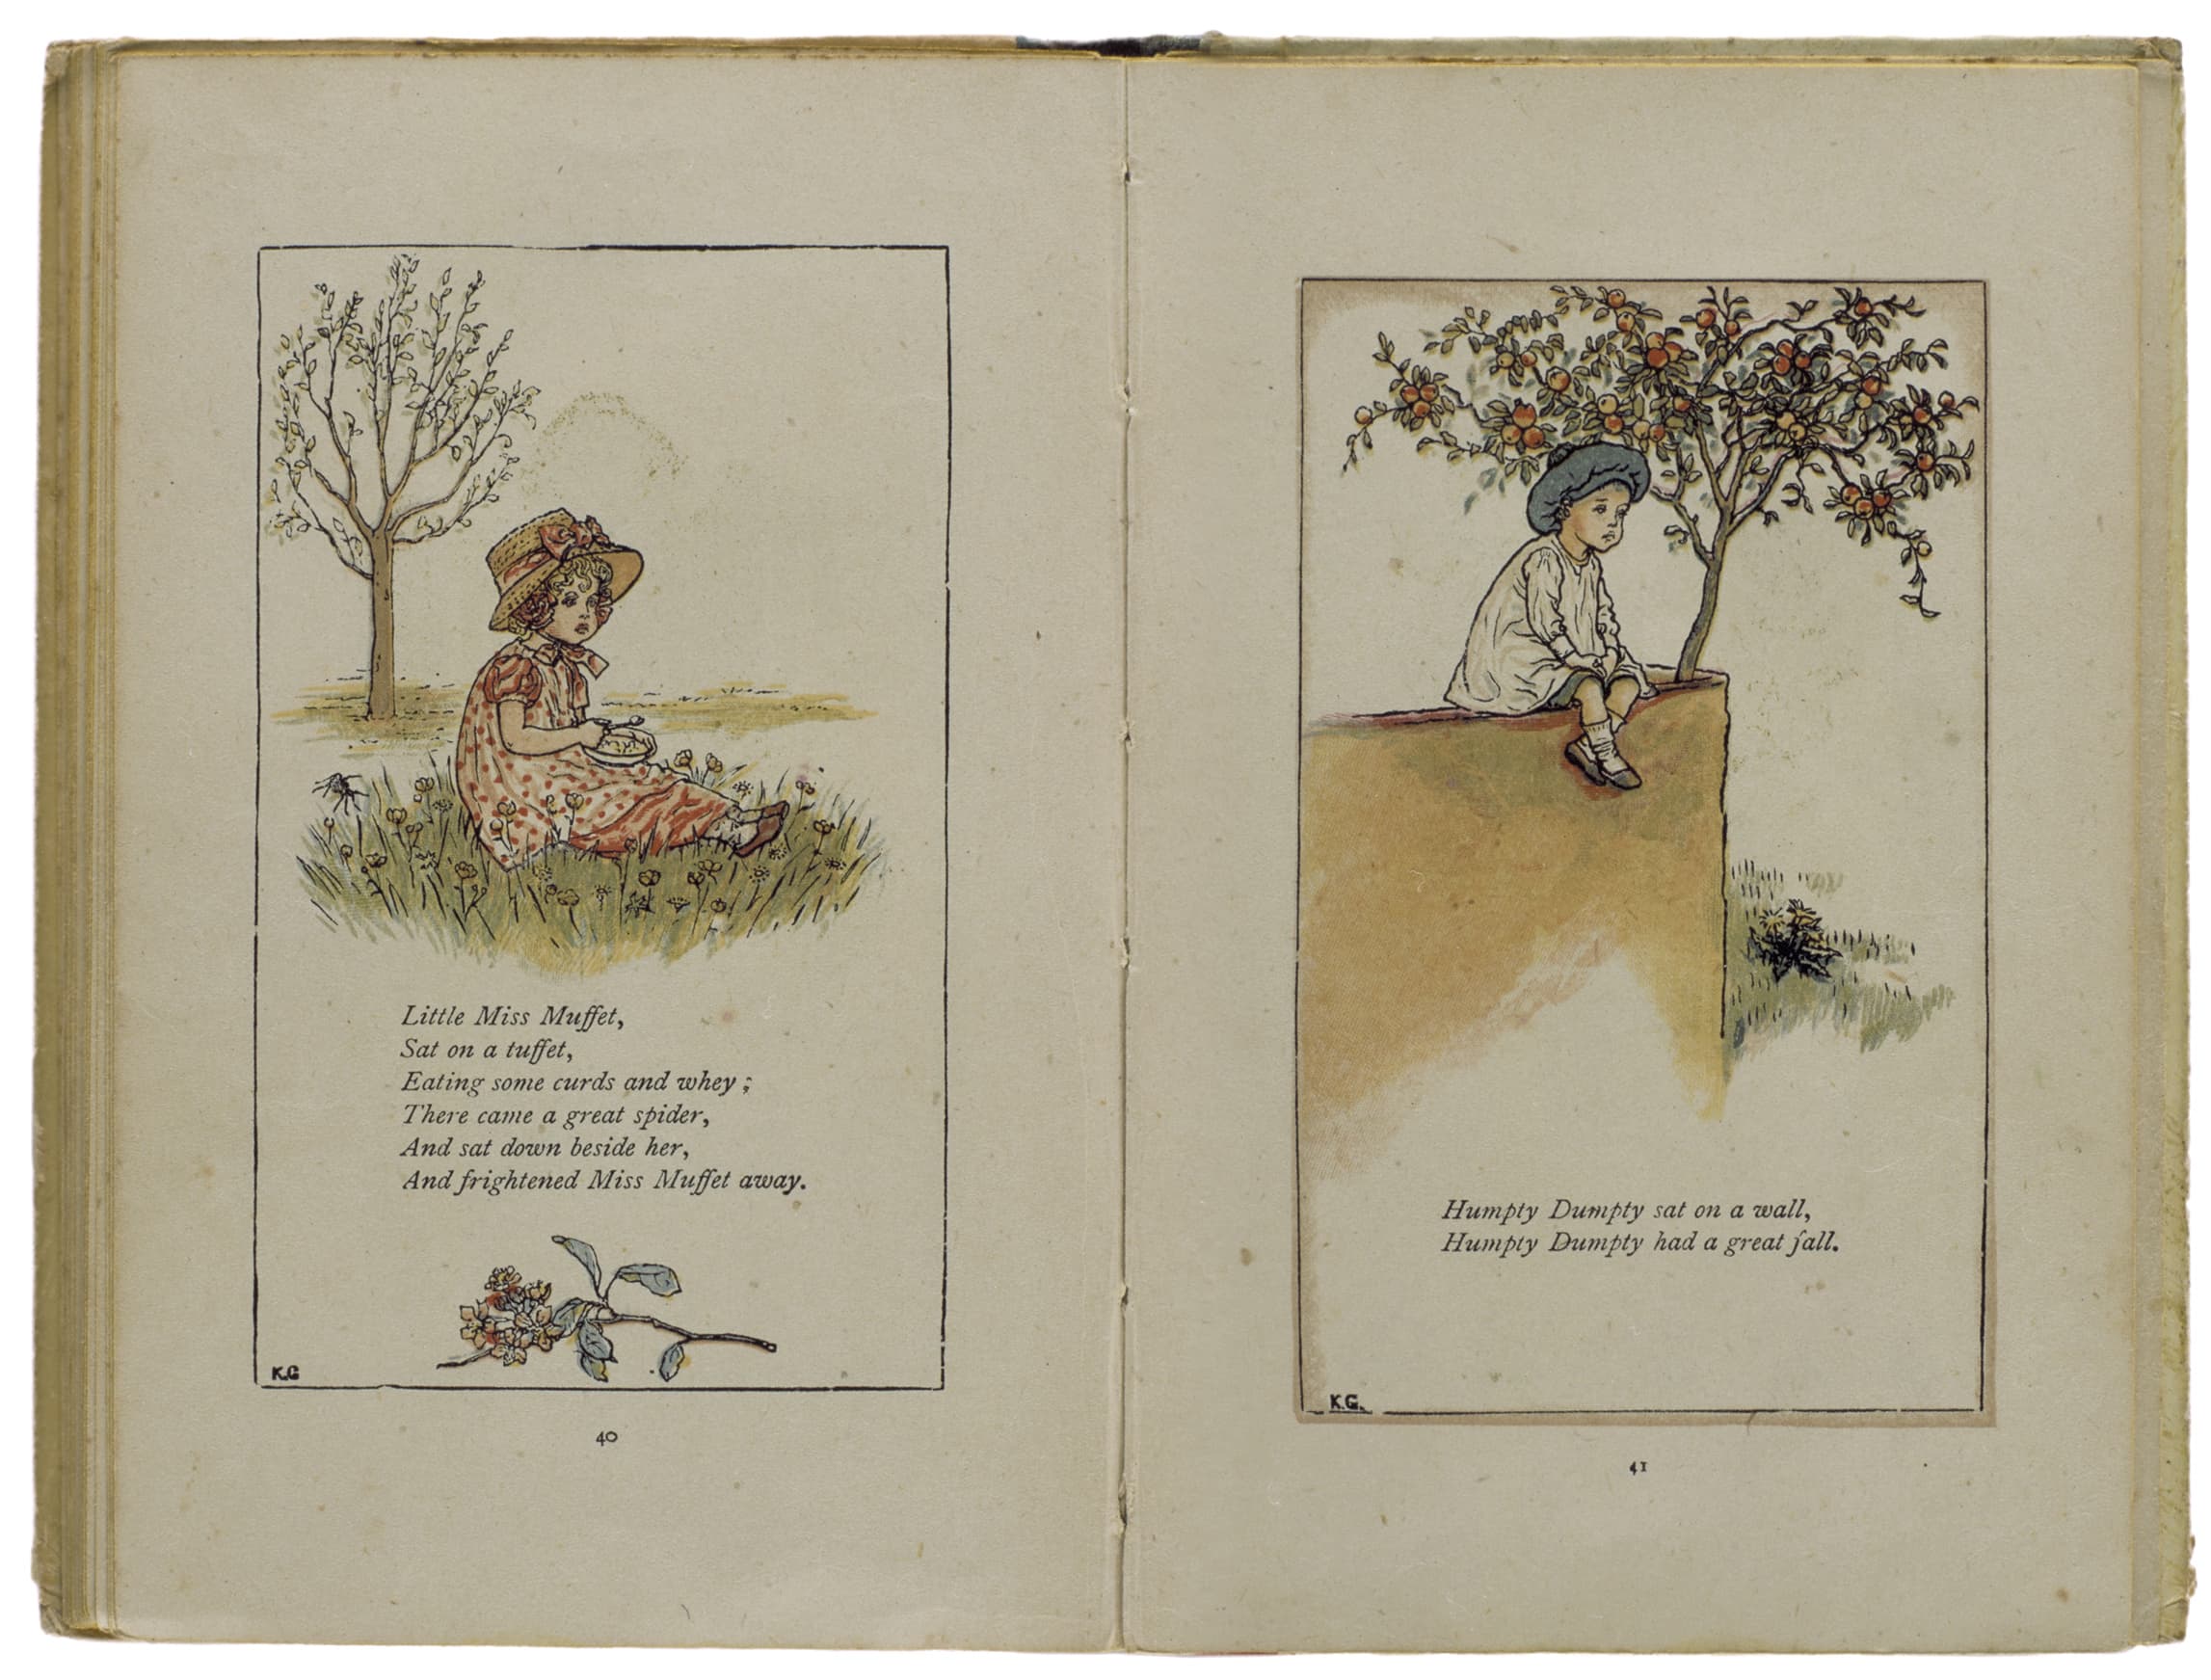 page 40-41 of Mother Goose